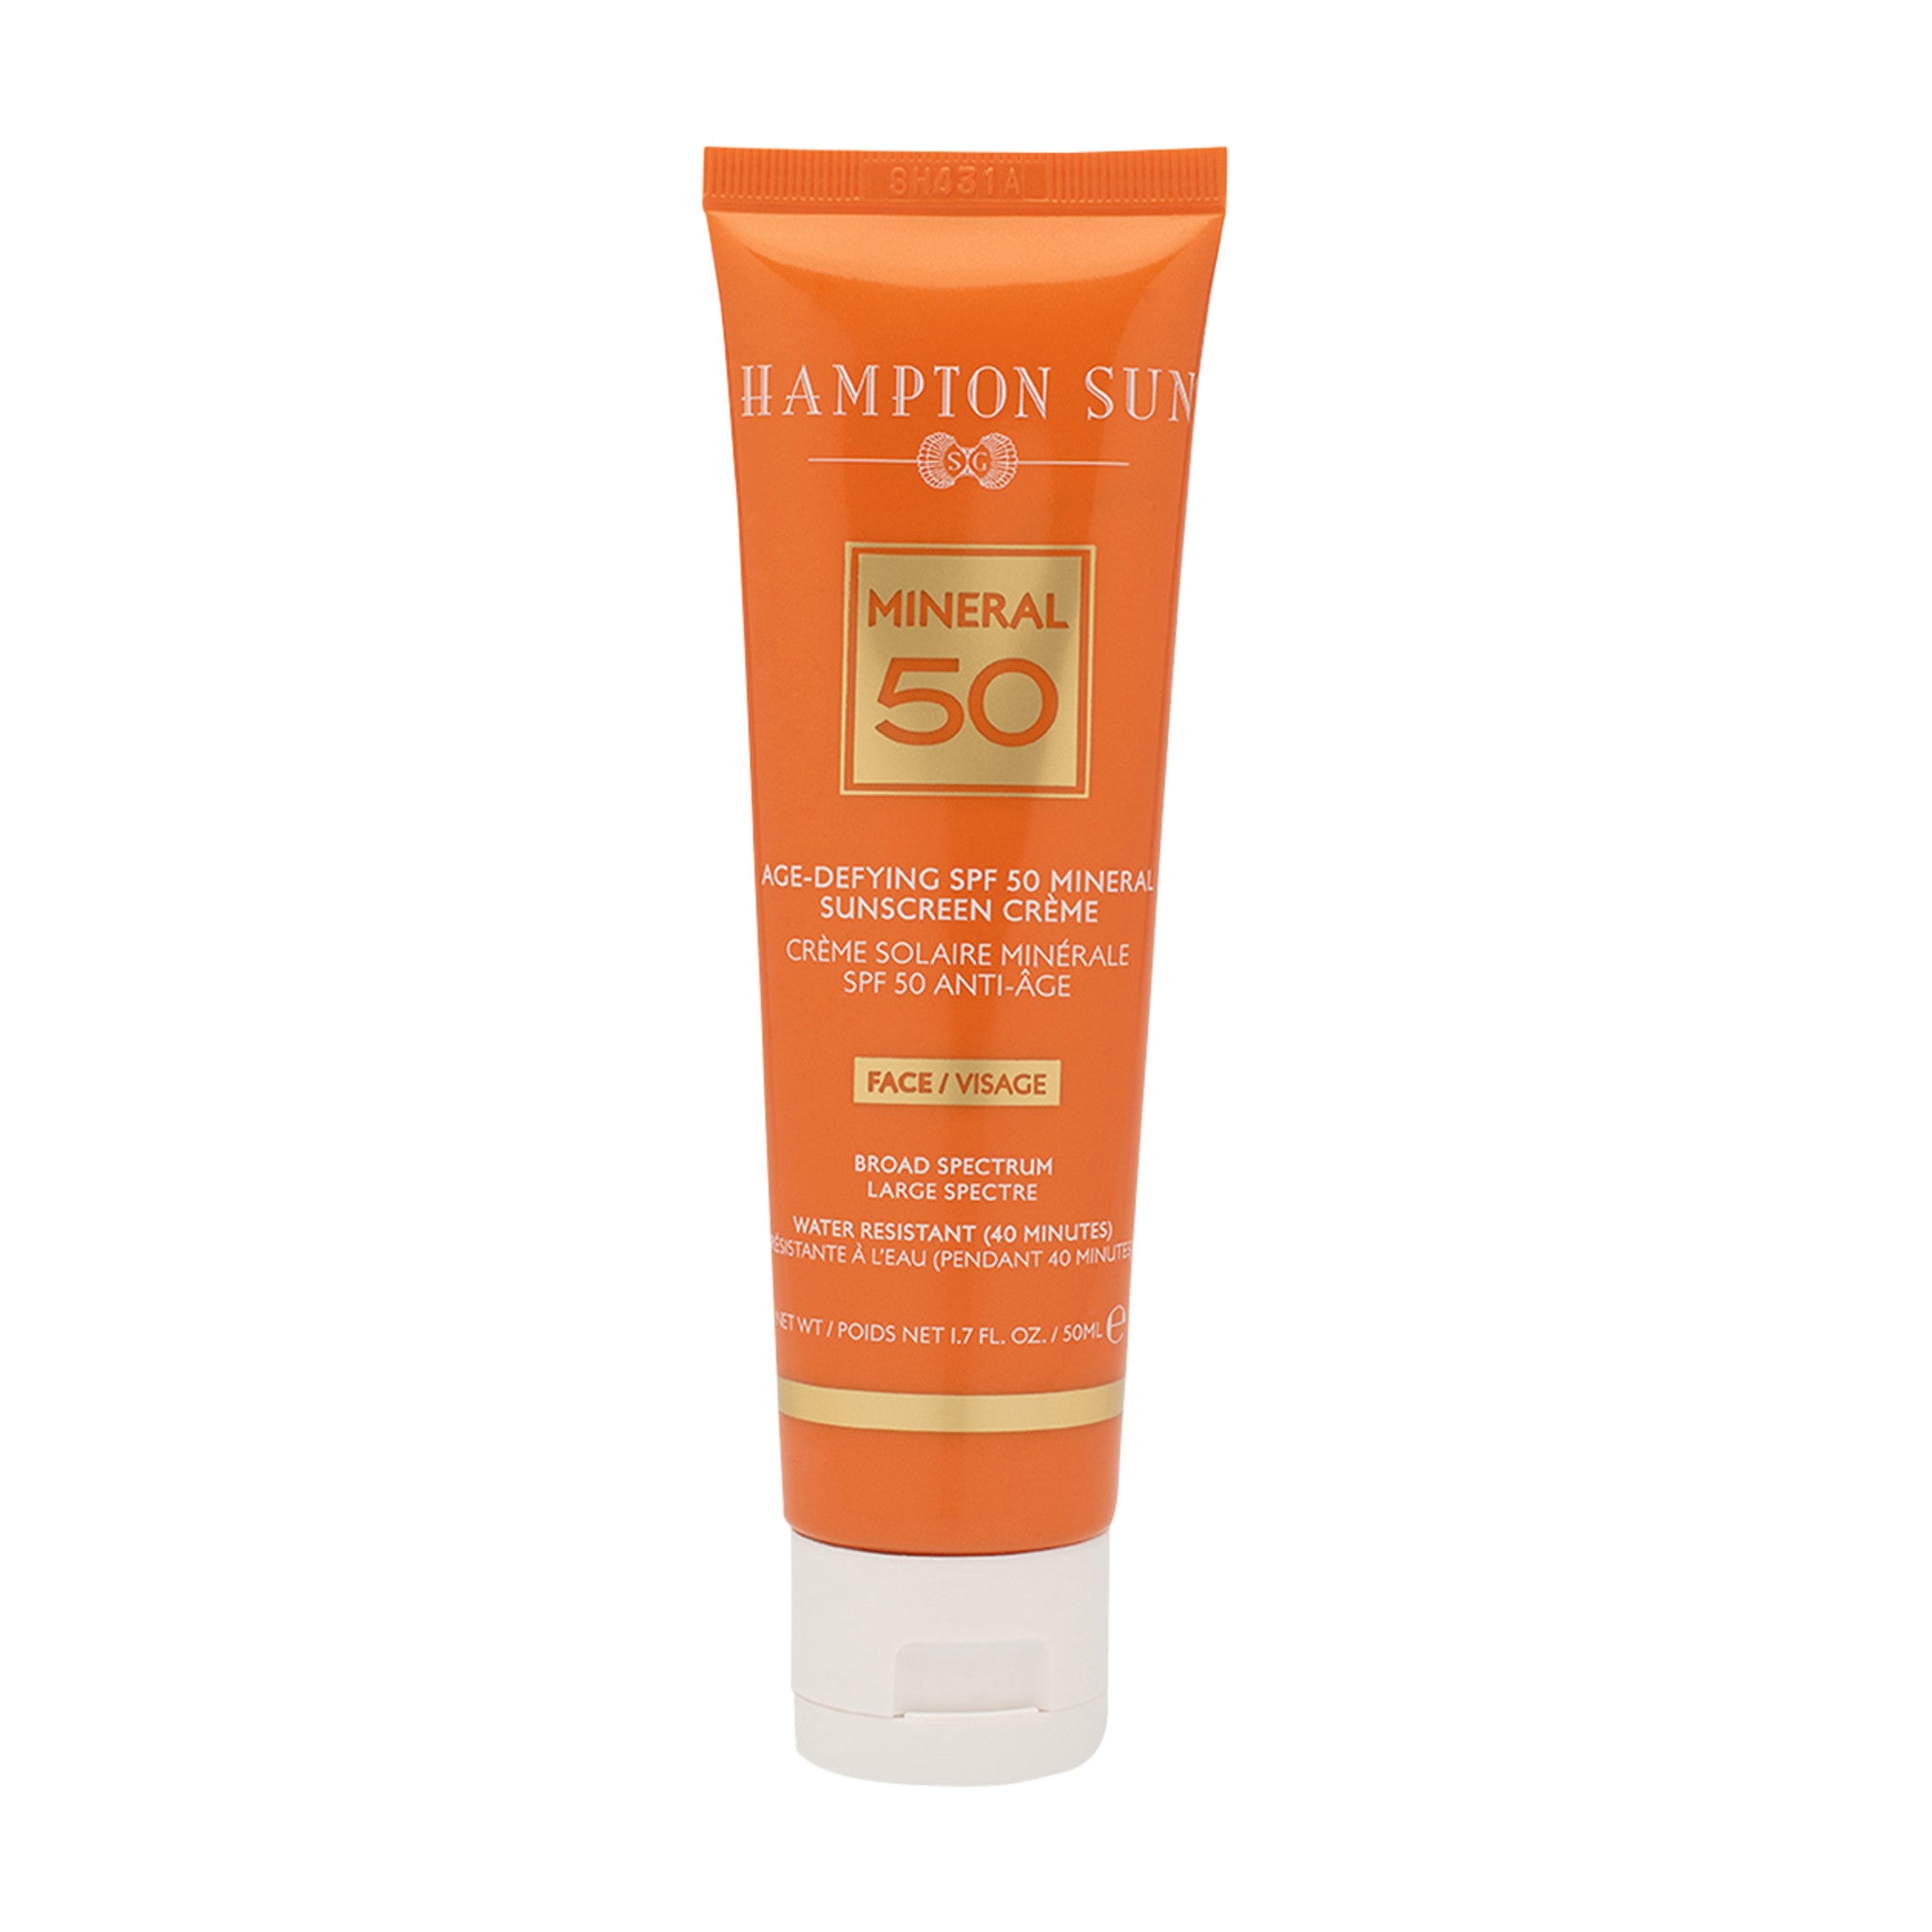 Age Defying Mineral for Face SPF 50 main image.